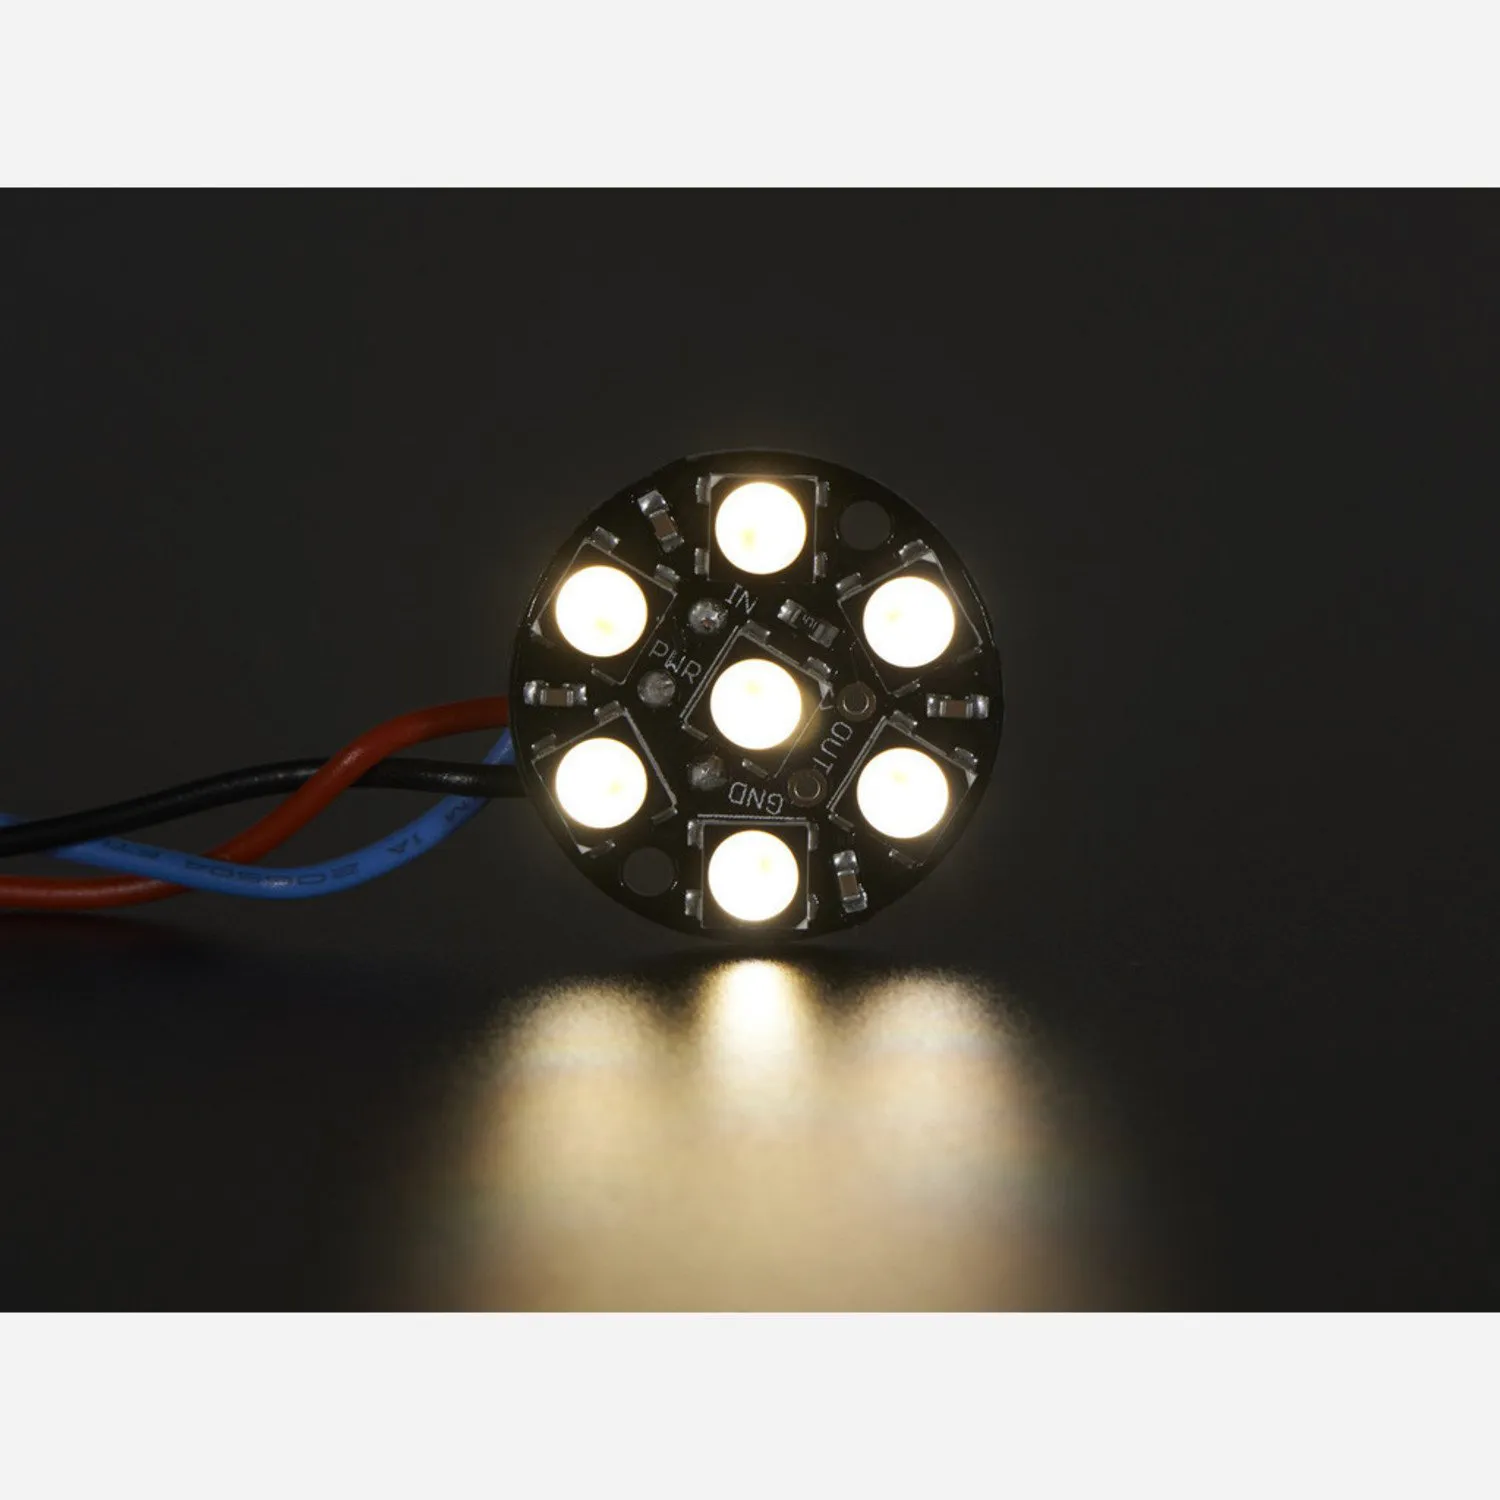 Photo of NeoPixel Jewel - 7 x 5050 RGBW LED w/ Integrated Drivers - Natural White - ~4500K